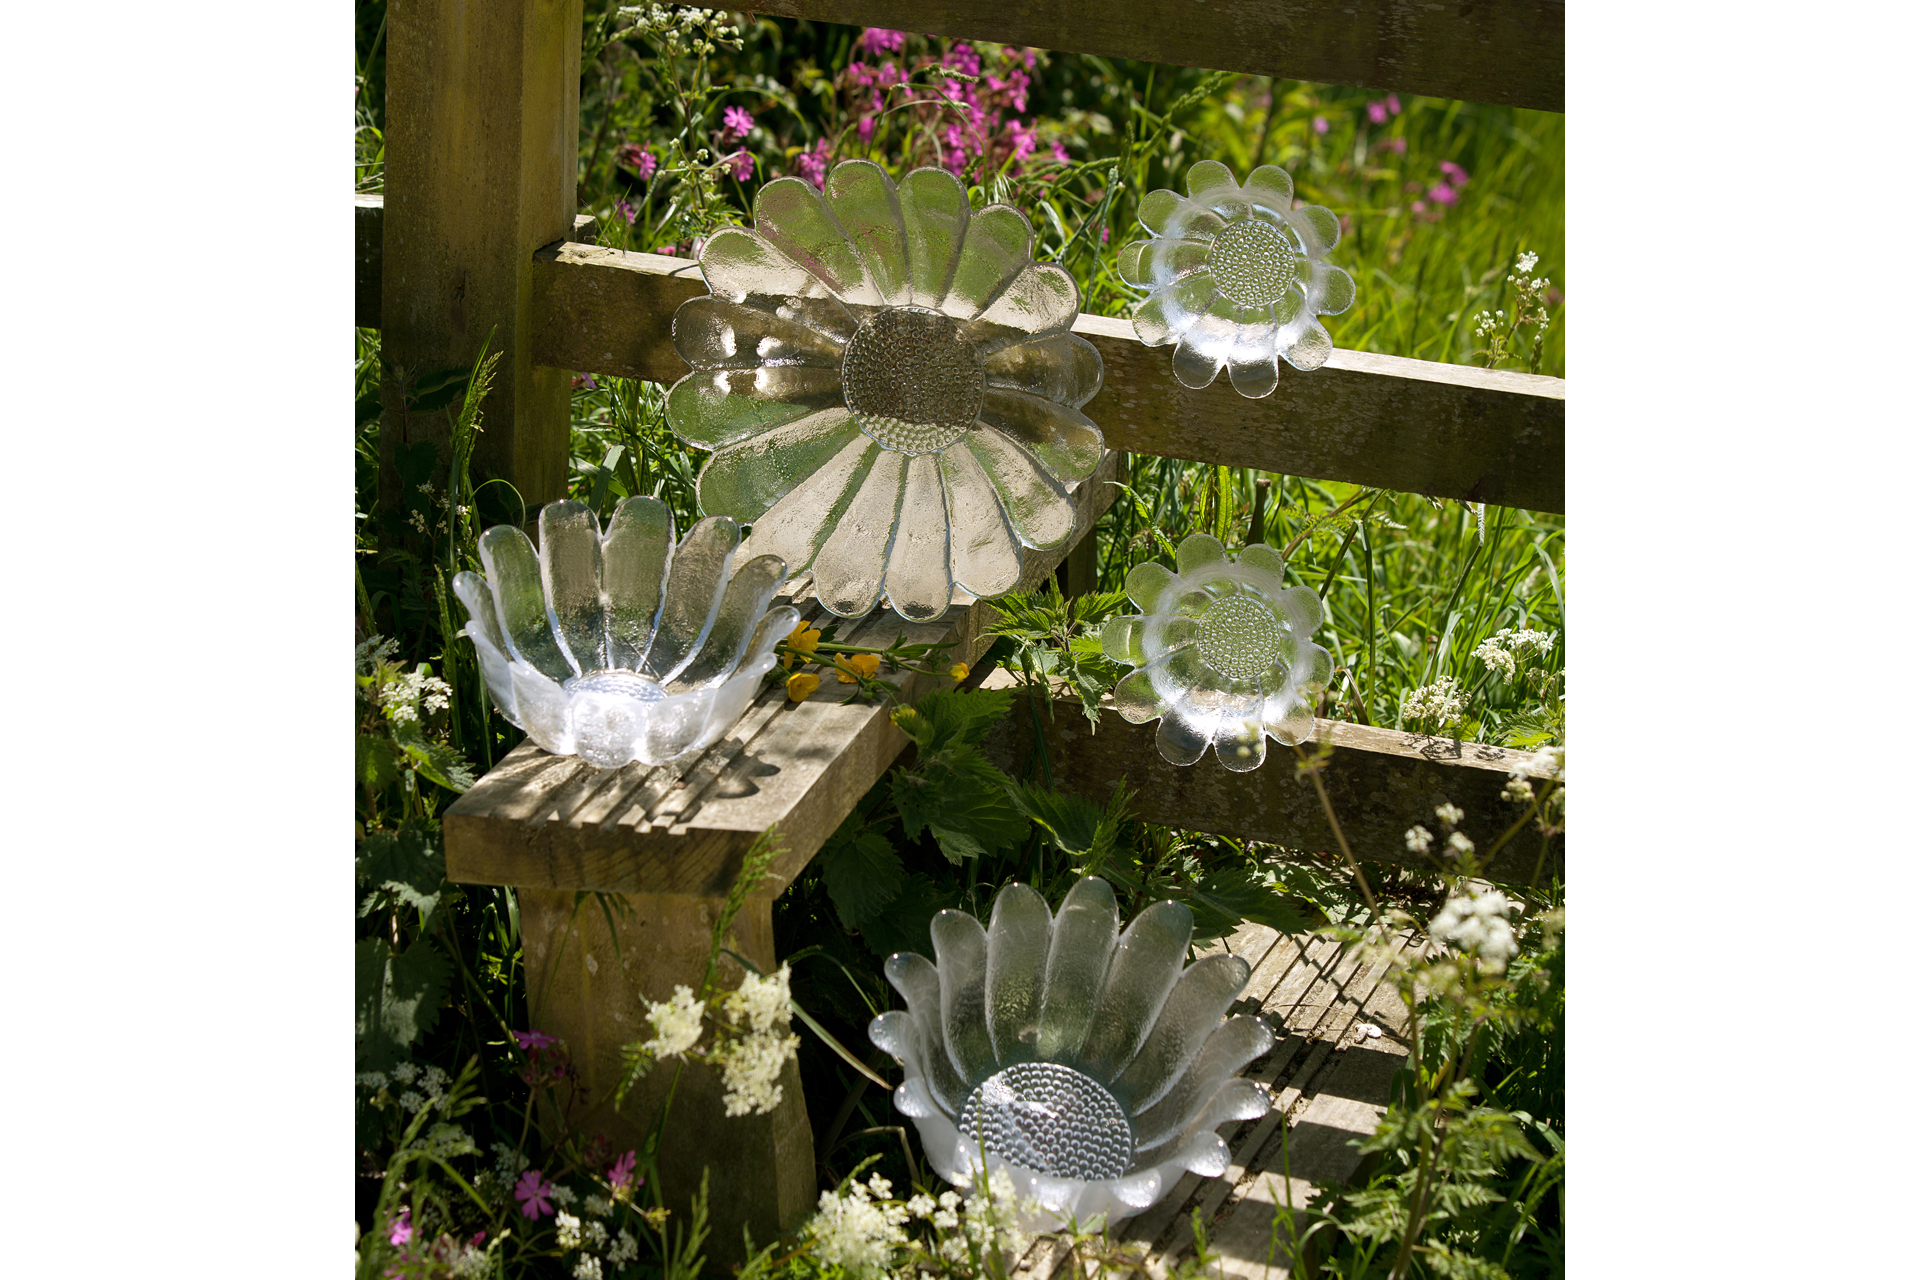 Five Daisy bowls by Dartington Crystal, displayed outside on a stile